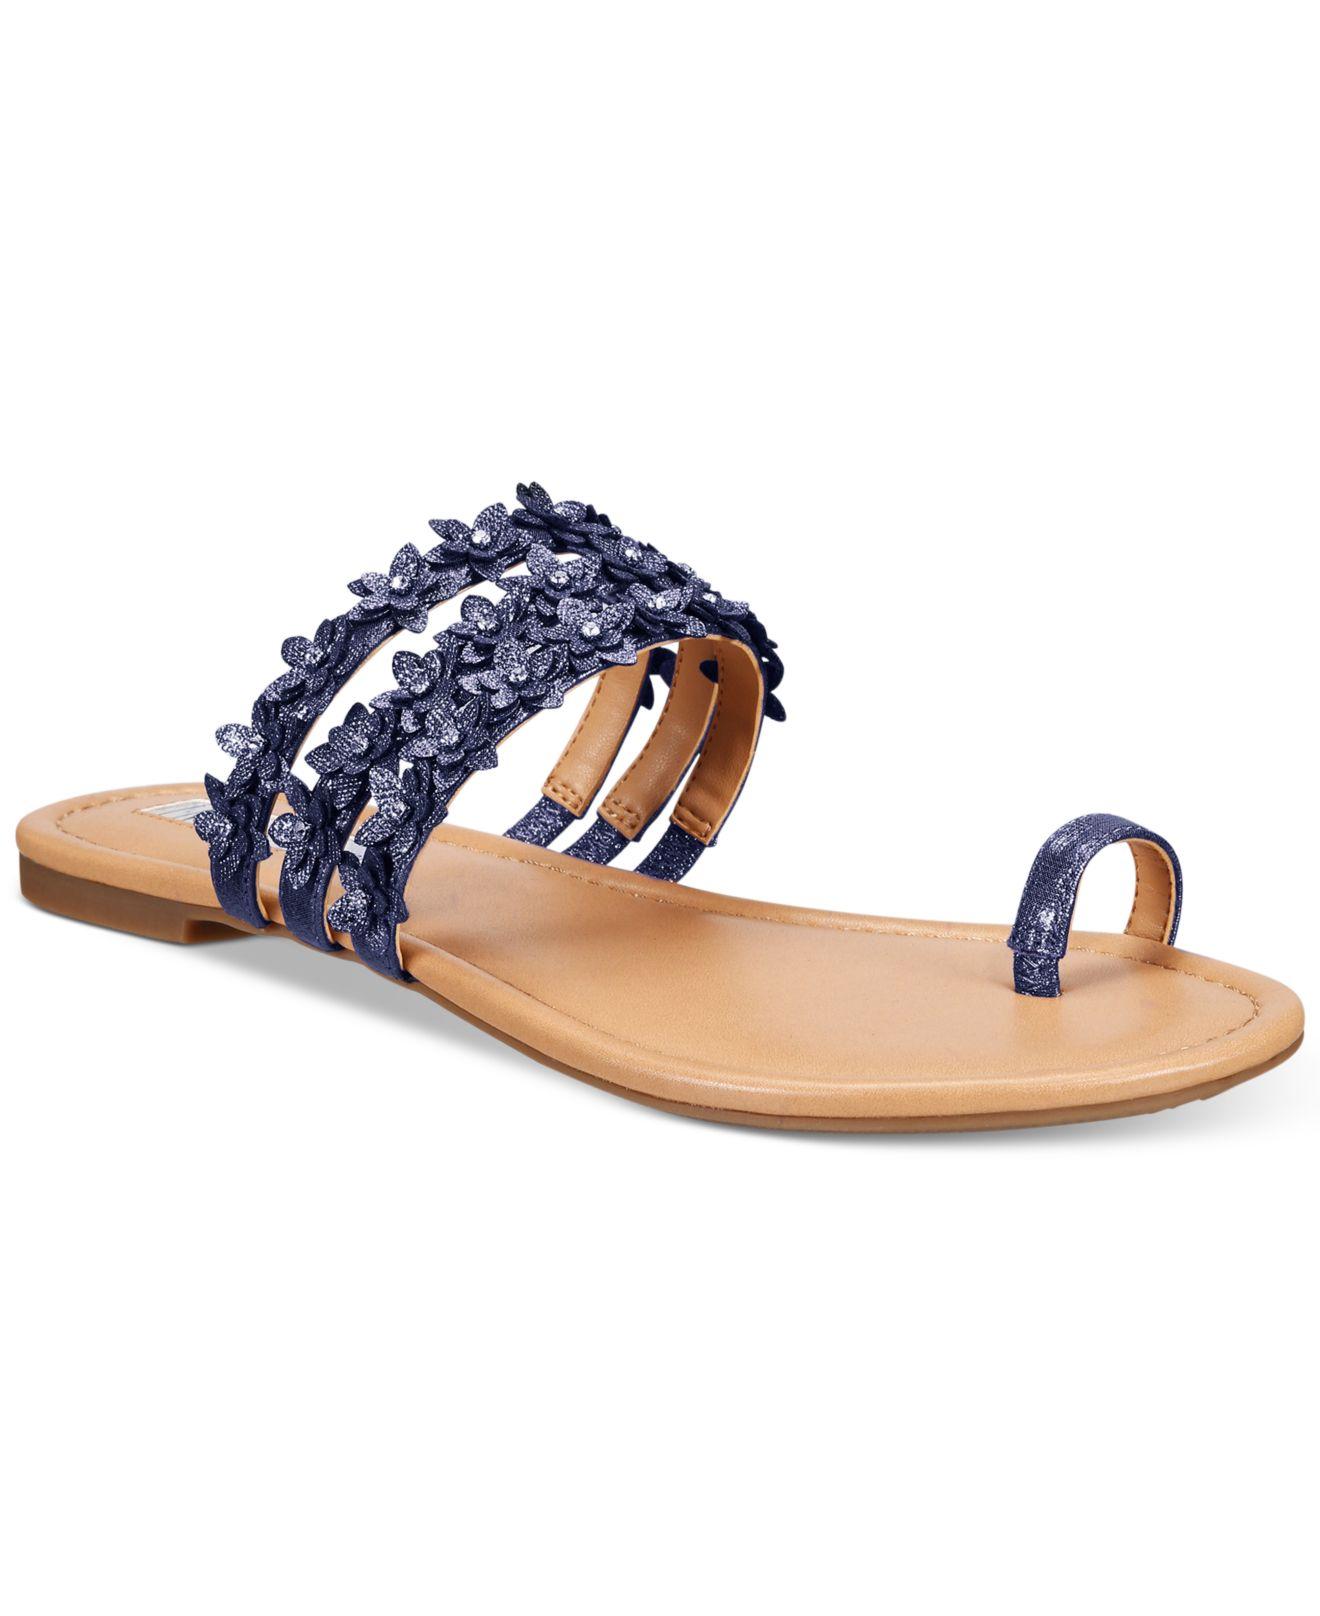 INC International Concepts Women's Linaa Embellished Flat Sandals in Navy (Blue) - Lyst